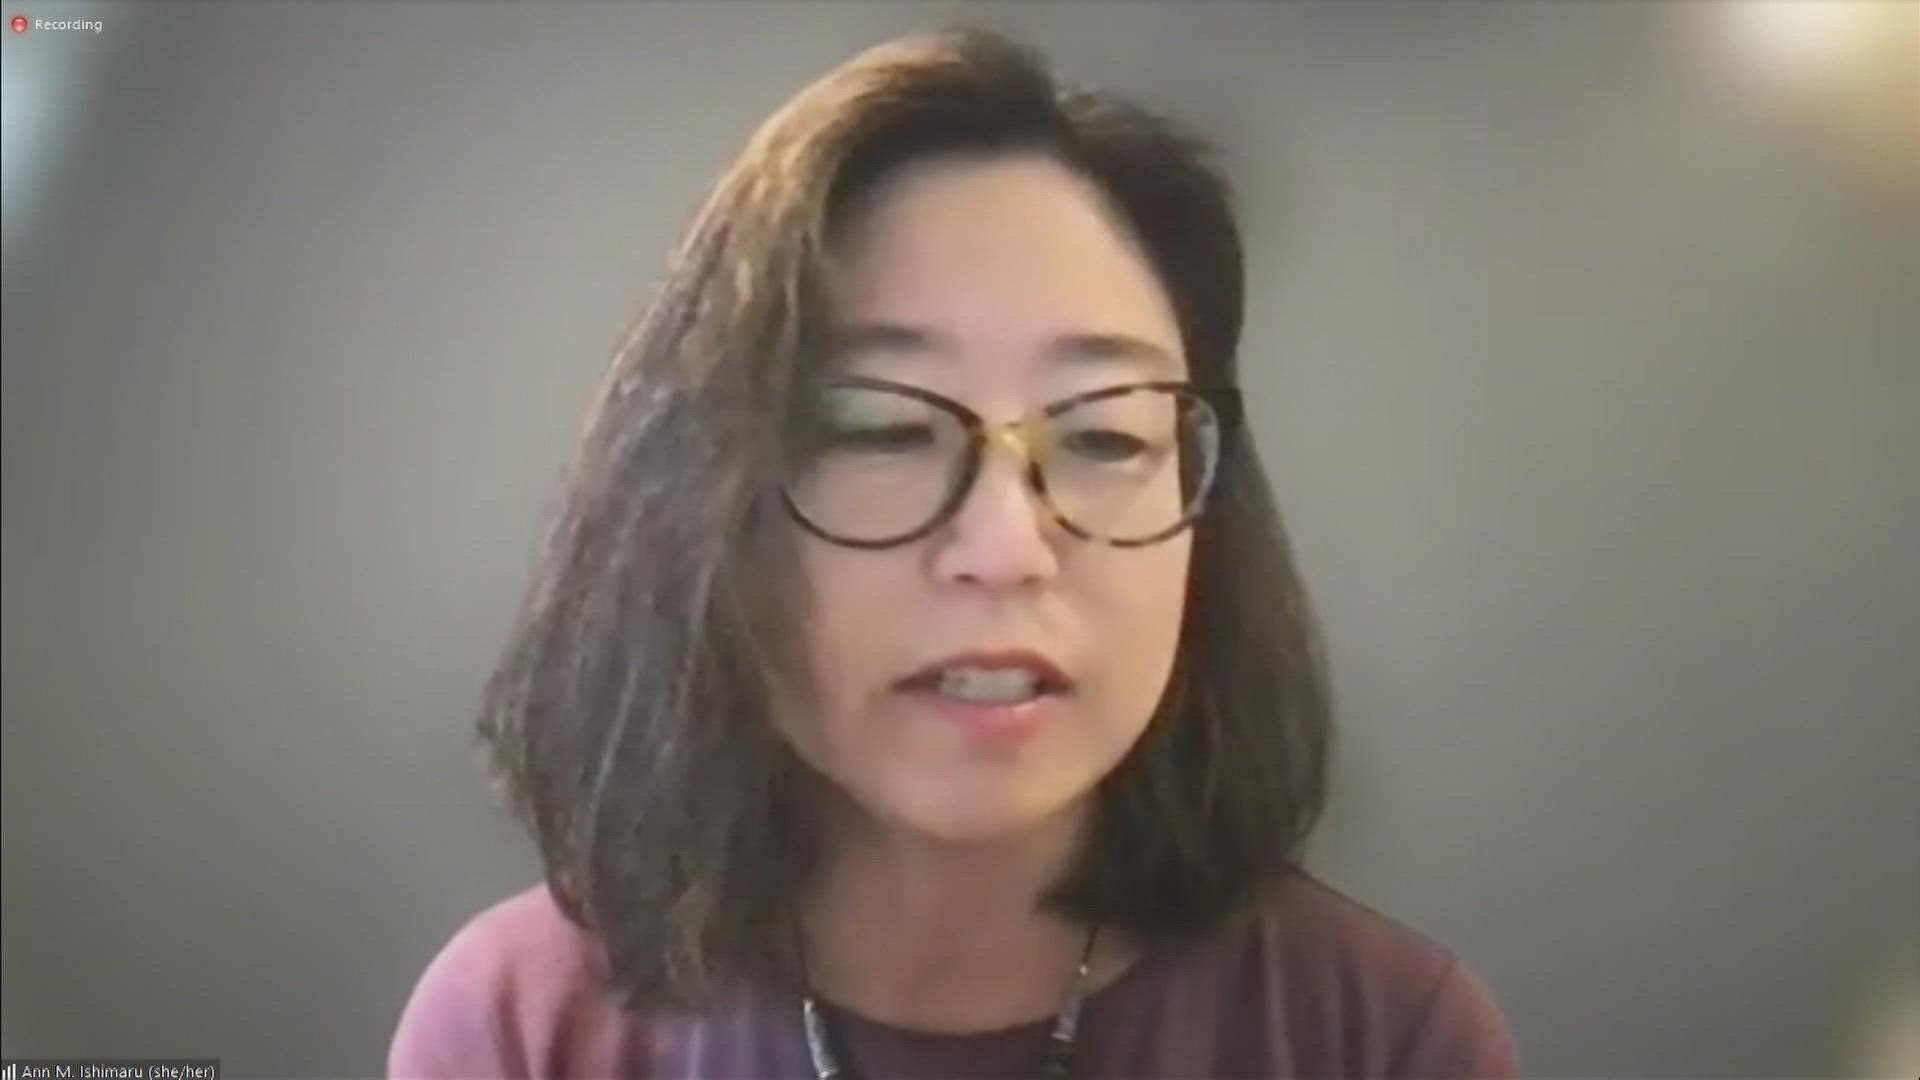 University of Washington Associate Professor Ann Ishimaru explains why some Black students preferred virtual learning compared to in-person classes.